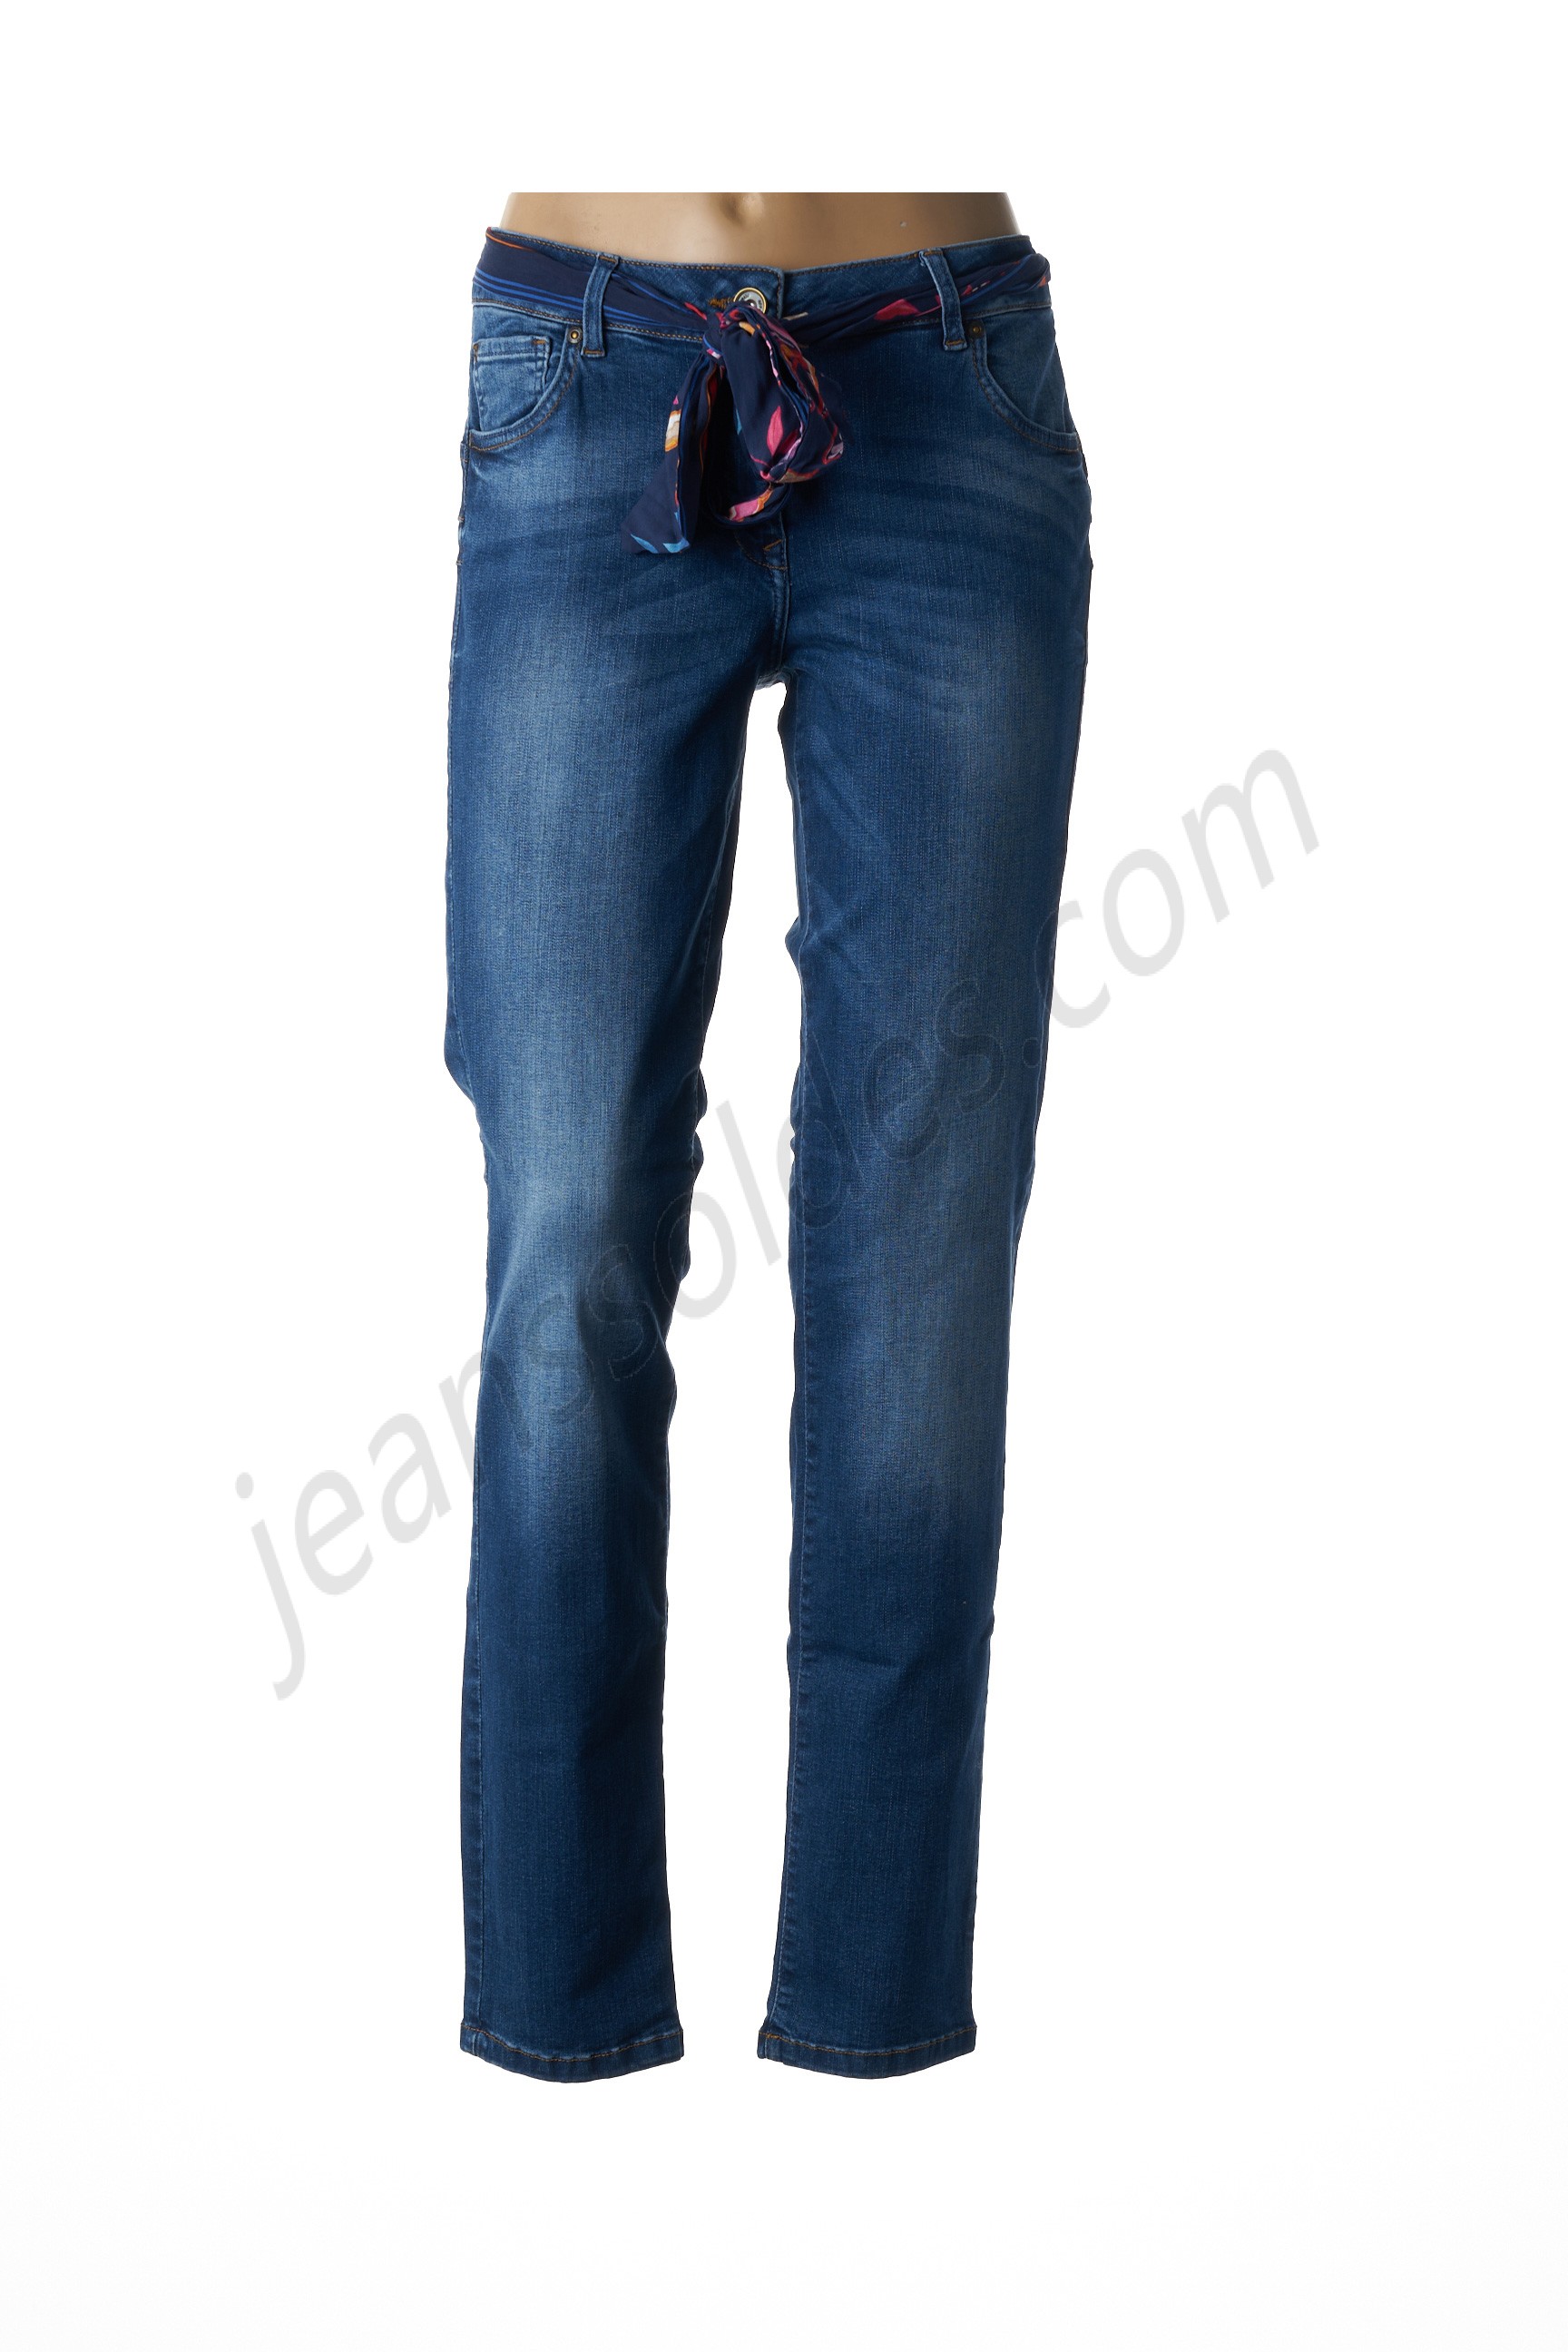 betty barclay-Jeans coupe slim prix d’amis - betty barclay-Jeans coupe slim prix d’amis